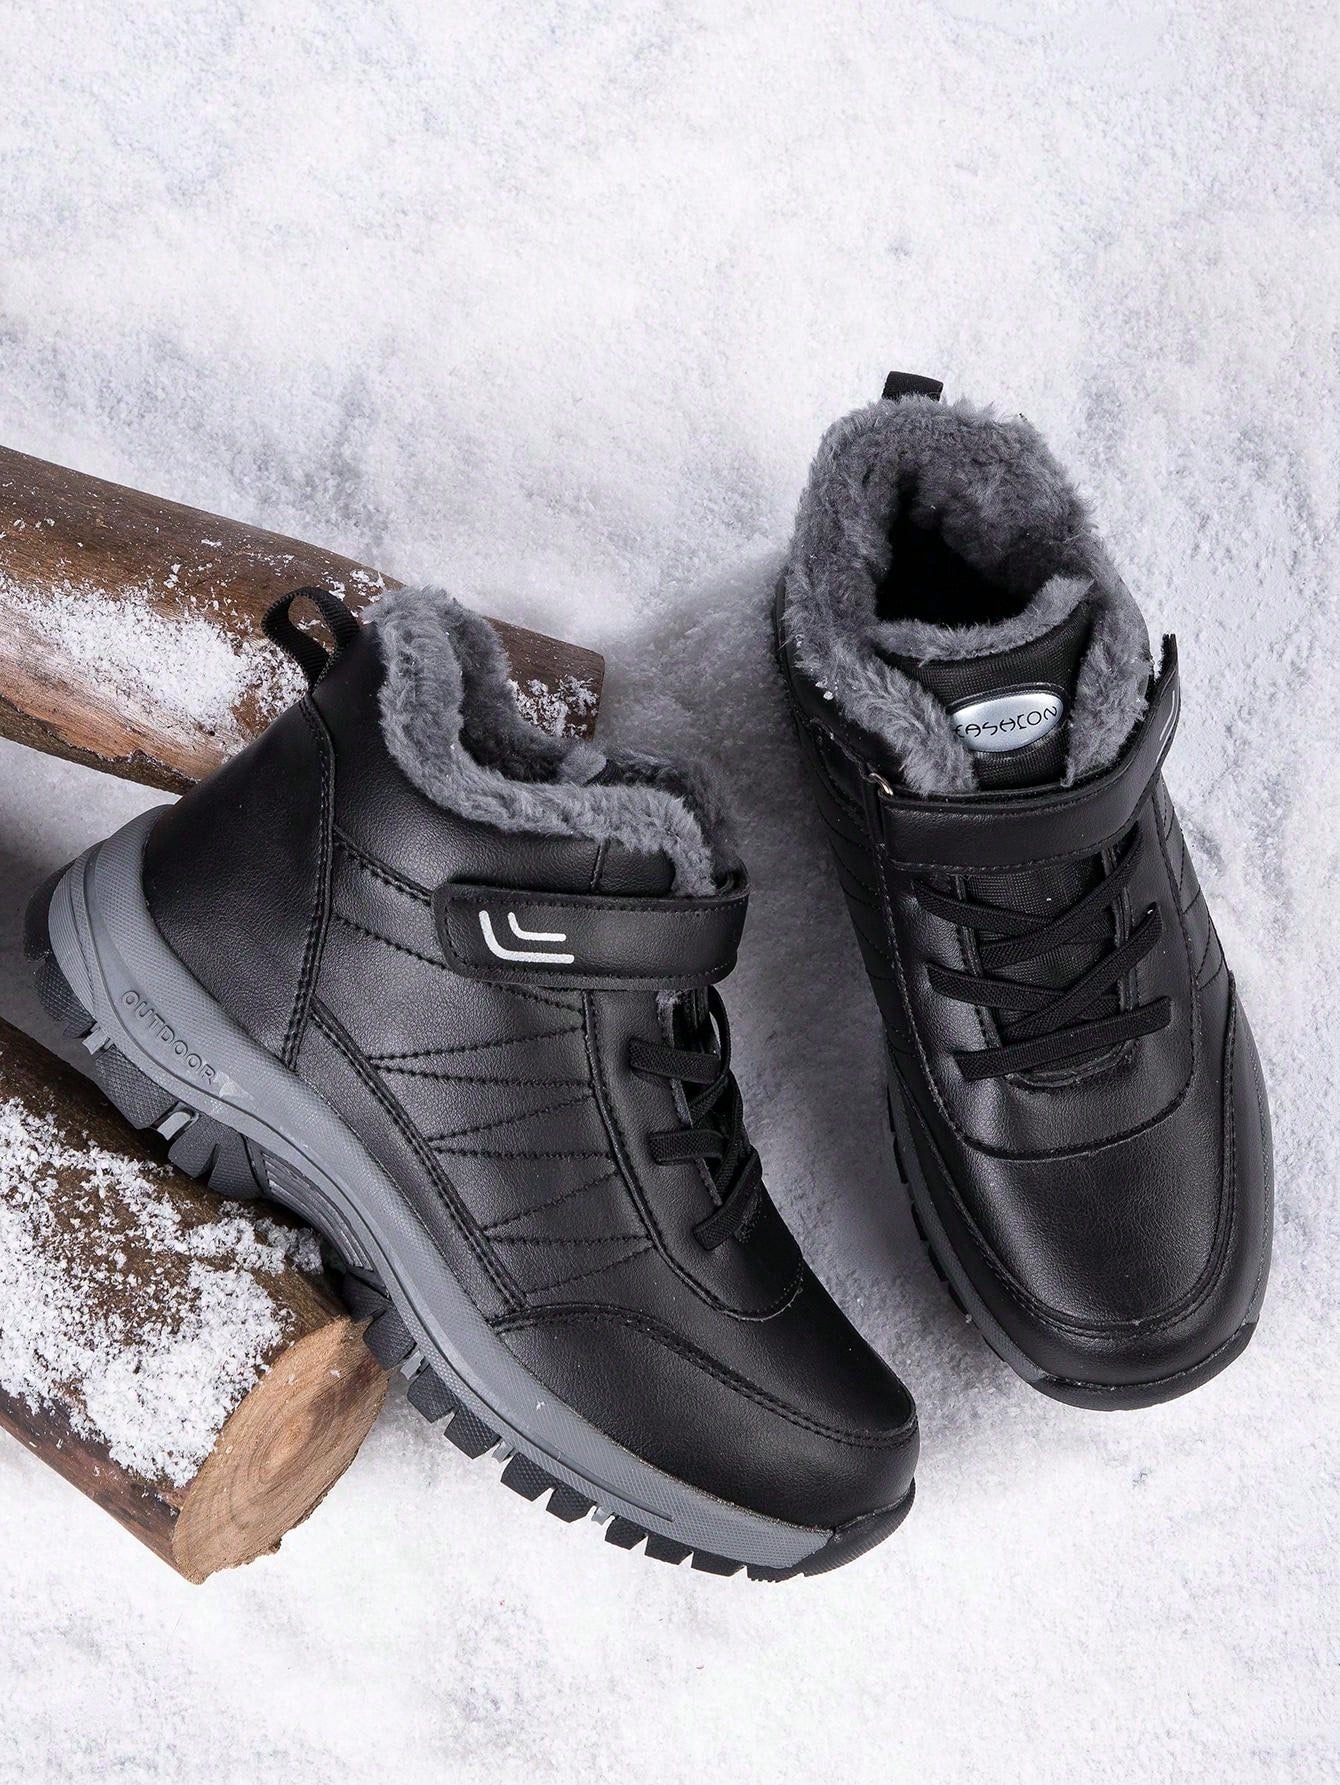 Men's Black Warm Winter Snow Boots With Velvet Lining, Non-slip, Outdoor Leisure, Comfortable And Versatile, Suitable For Daily Wear, Hiking, High-top Boots